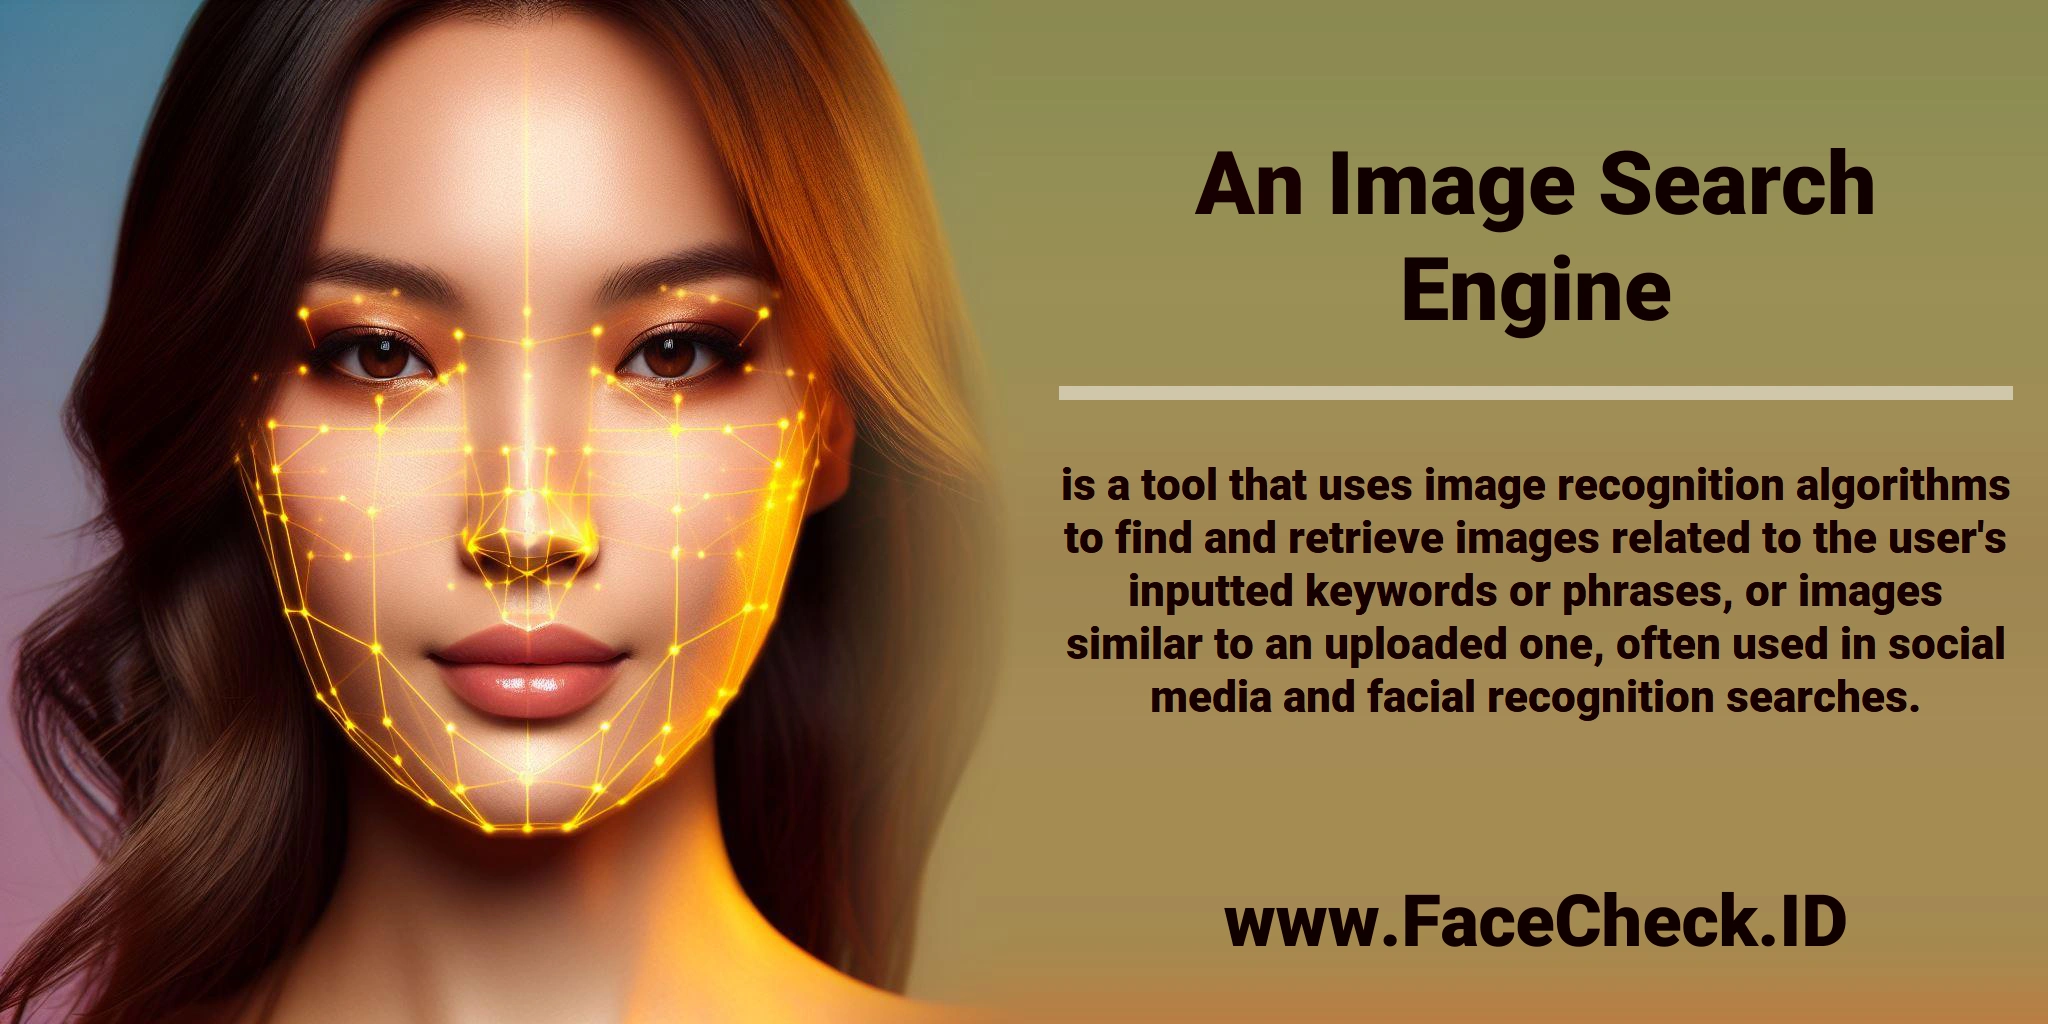 An <b>Image Search Engine</b> is a tool that uses image recognition algorithms to find and retrieve images related to the user's inputted keywords or phrases, or images similar to an uploaded one, often used in social media and facial recognition searches.